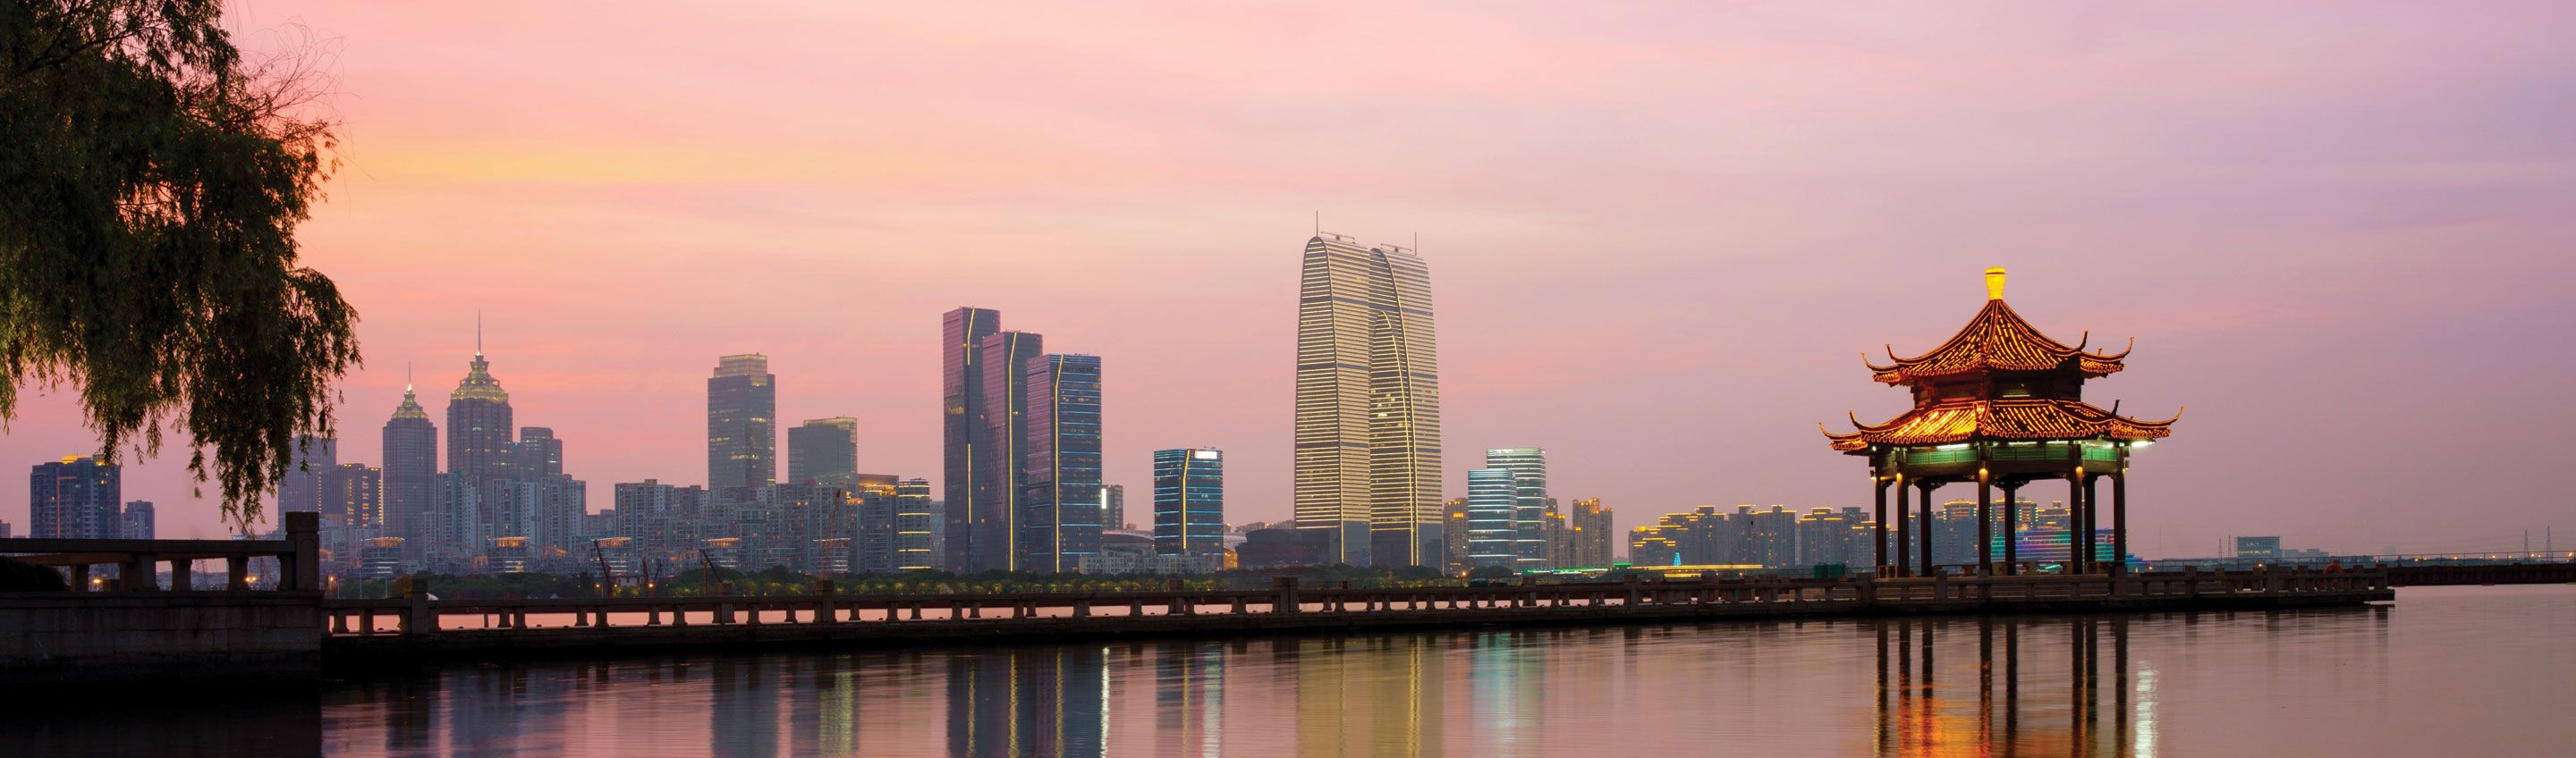 pink sunset skies reflect on the water and the suzhou skyline